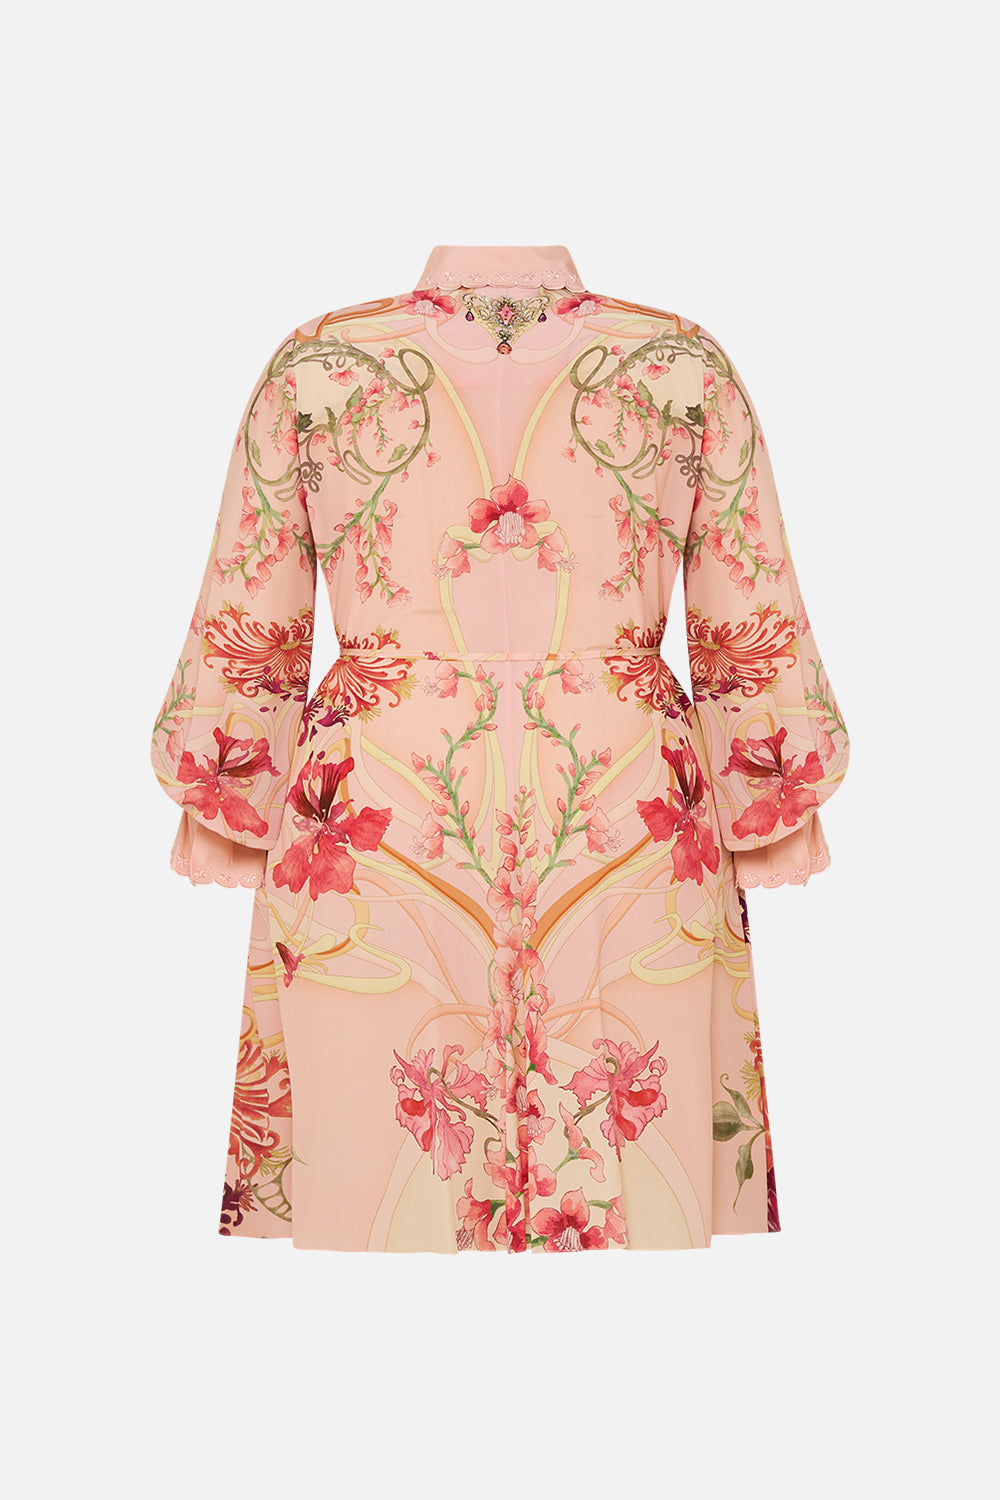 CAMILLA Floral Shift Shirt Dress in Blossoms and Brushstrokes